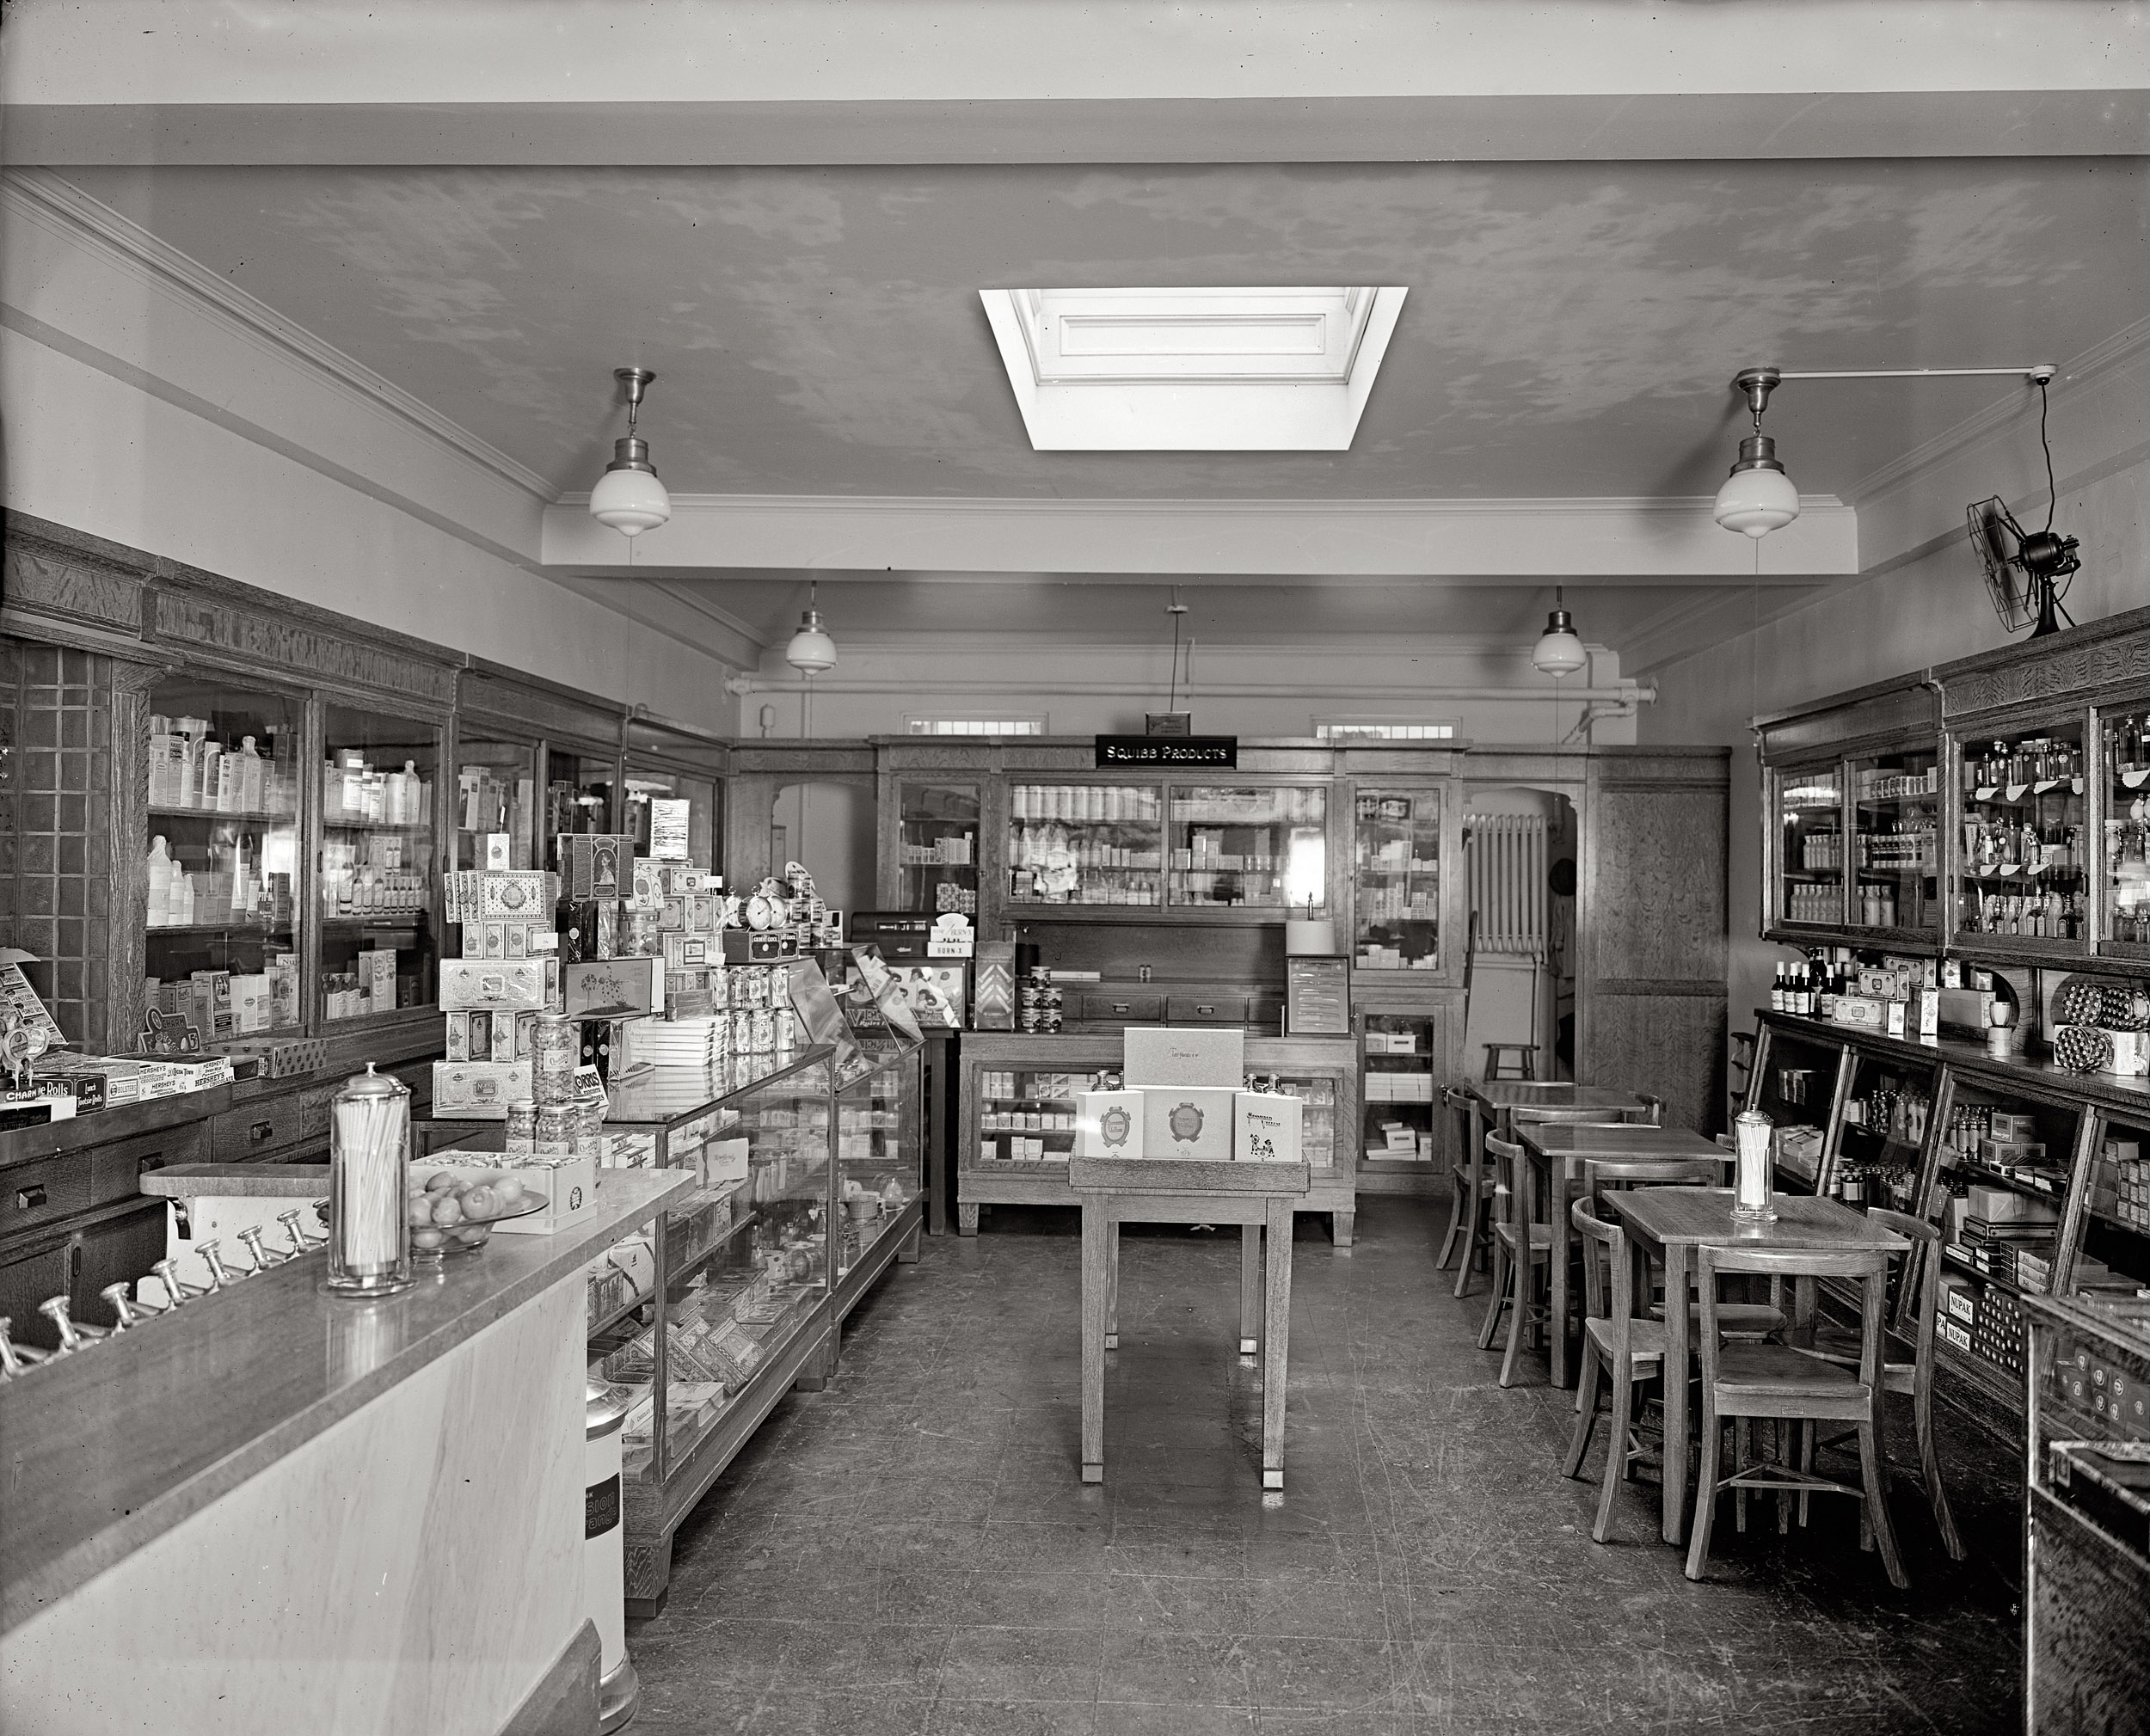 Washington, D.C., circa 1924. "Cathedral Mansions drug store." View full size. National Photo Company Collection glass negative, Library of Congress.